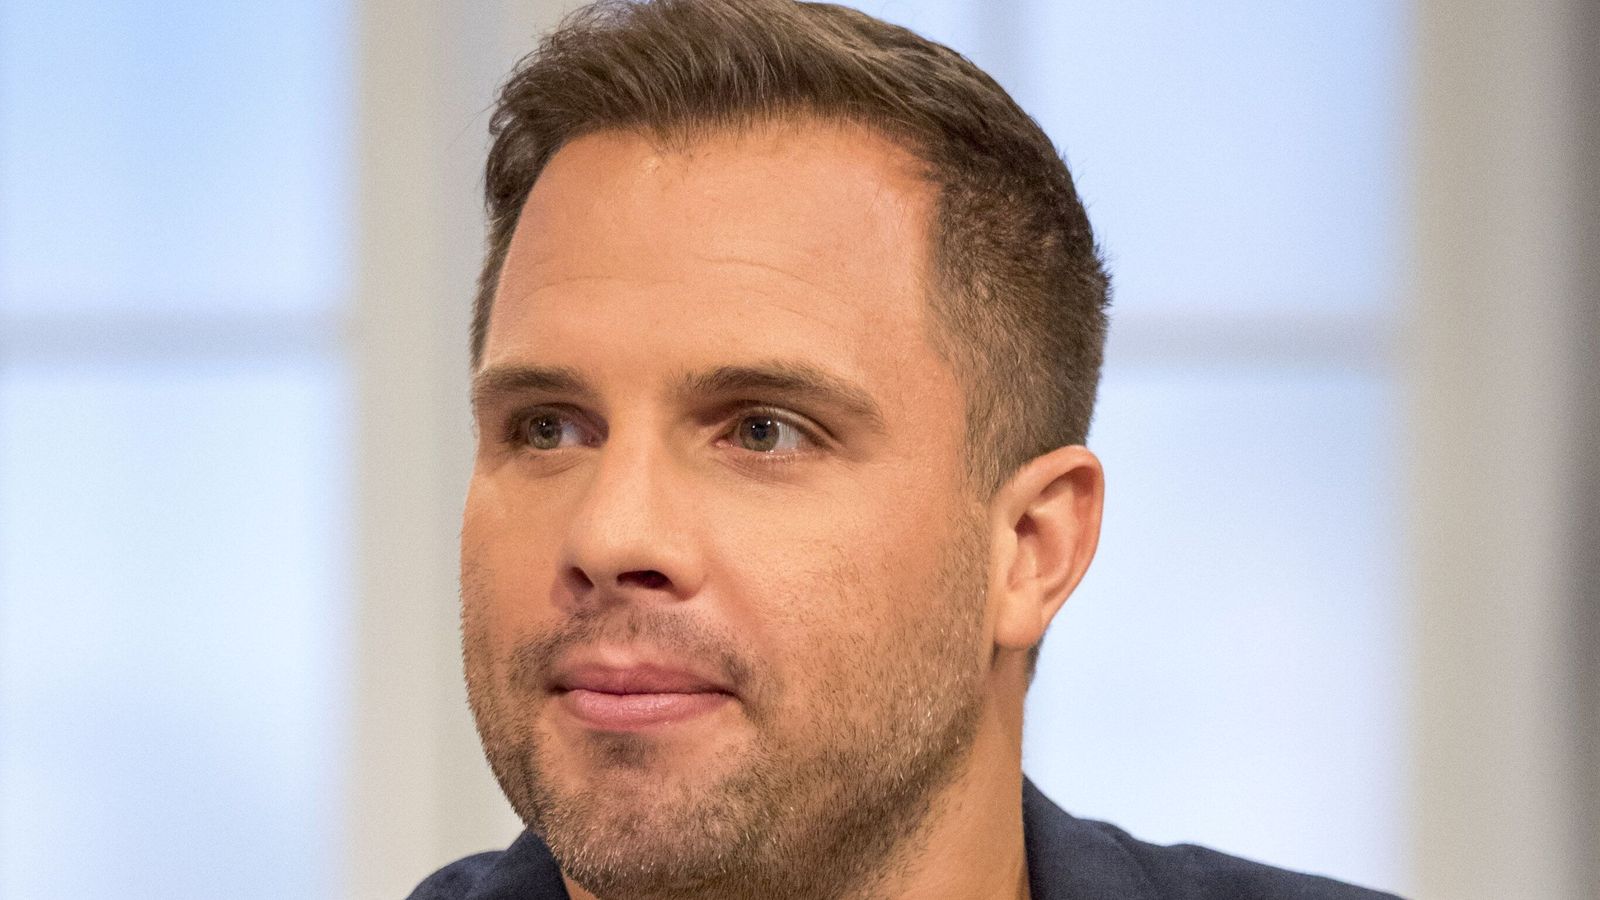 Dan Wootton's contract as MailOnline columnist terminated 